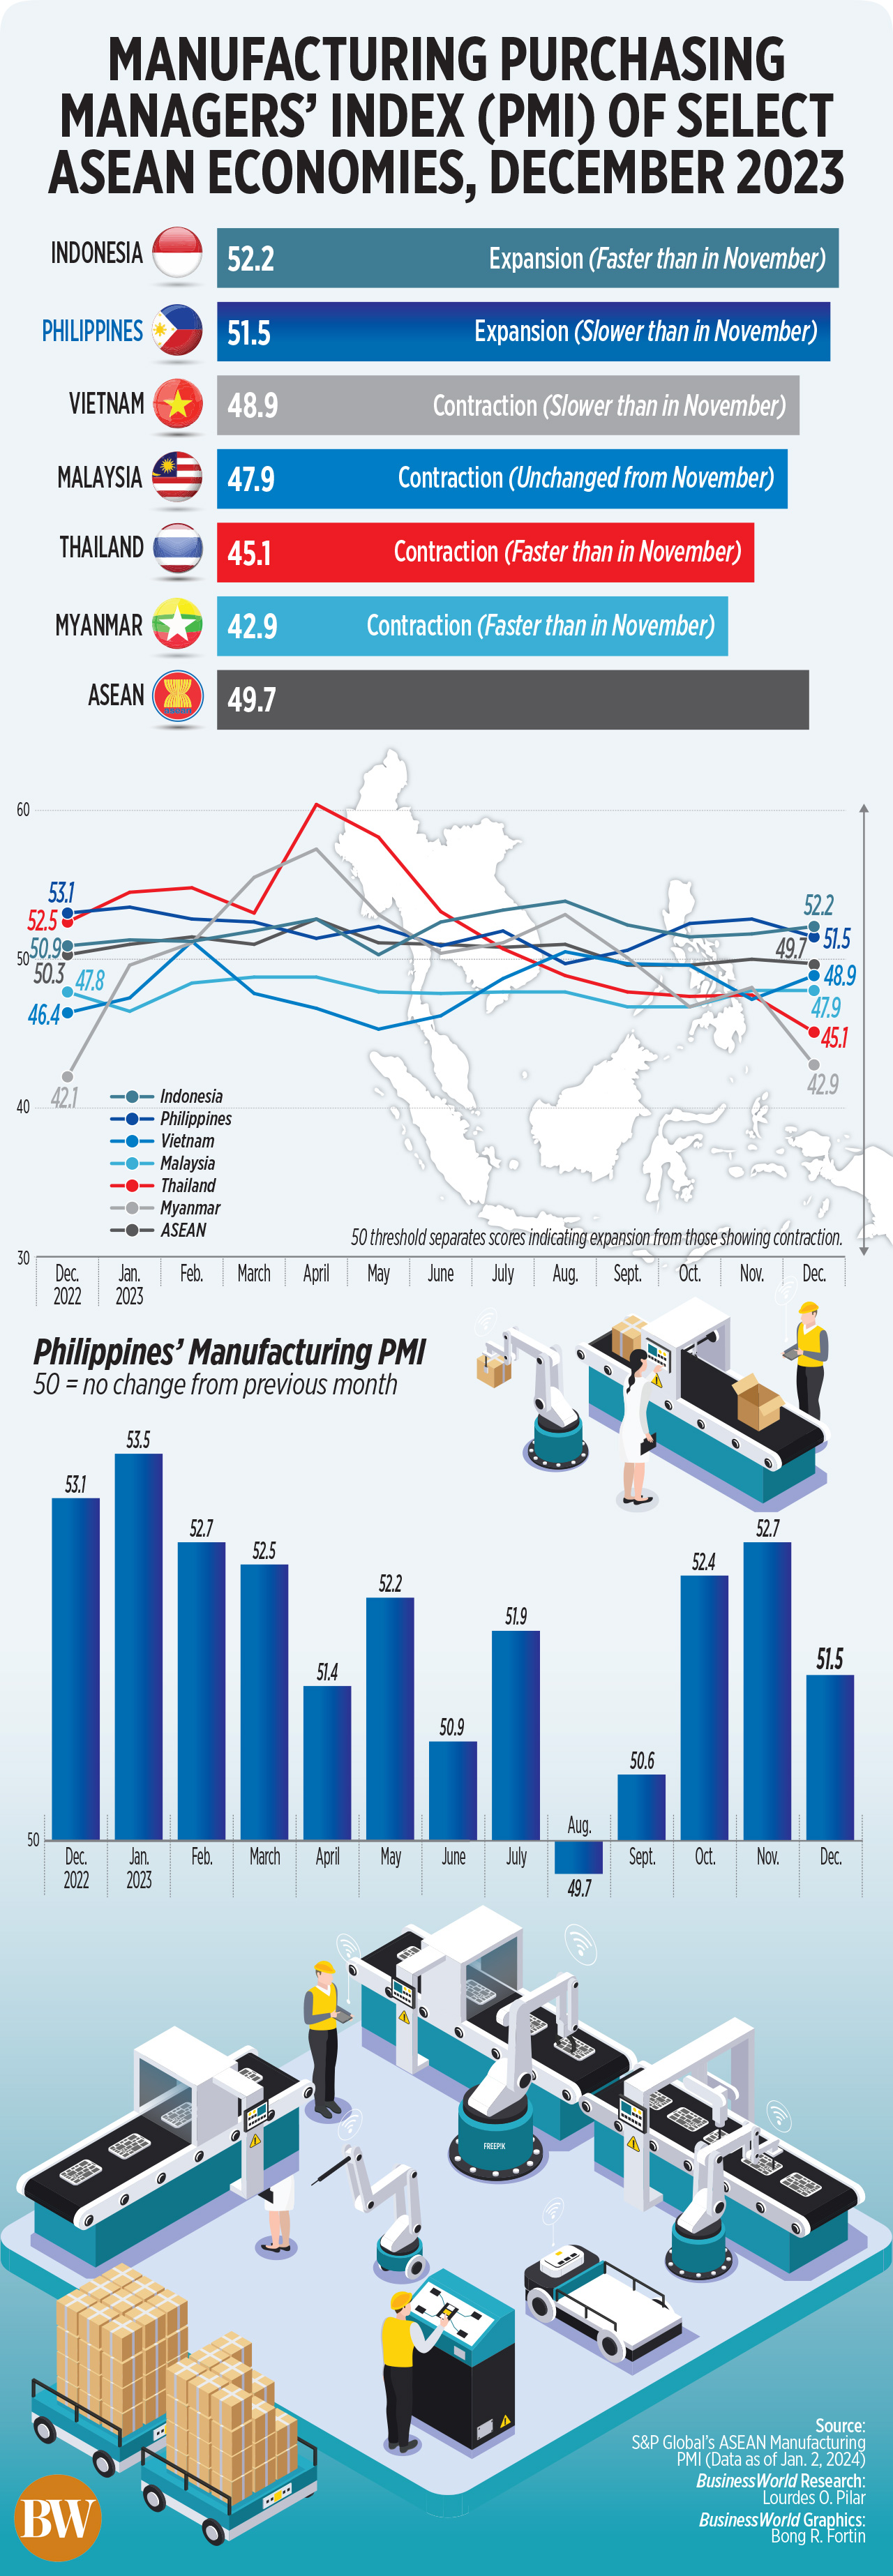 Manufacturing Purchasing Managers’ Index (PMI) of select ASEAN economies, December 2023